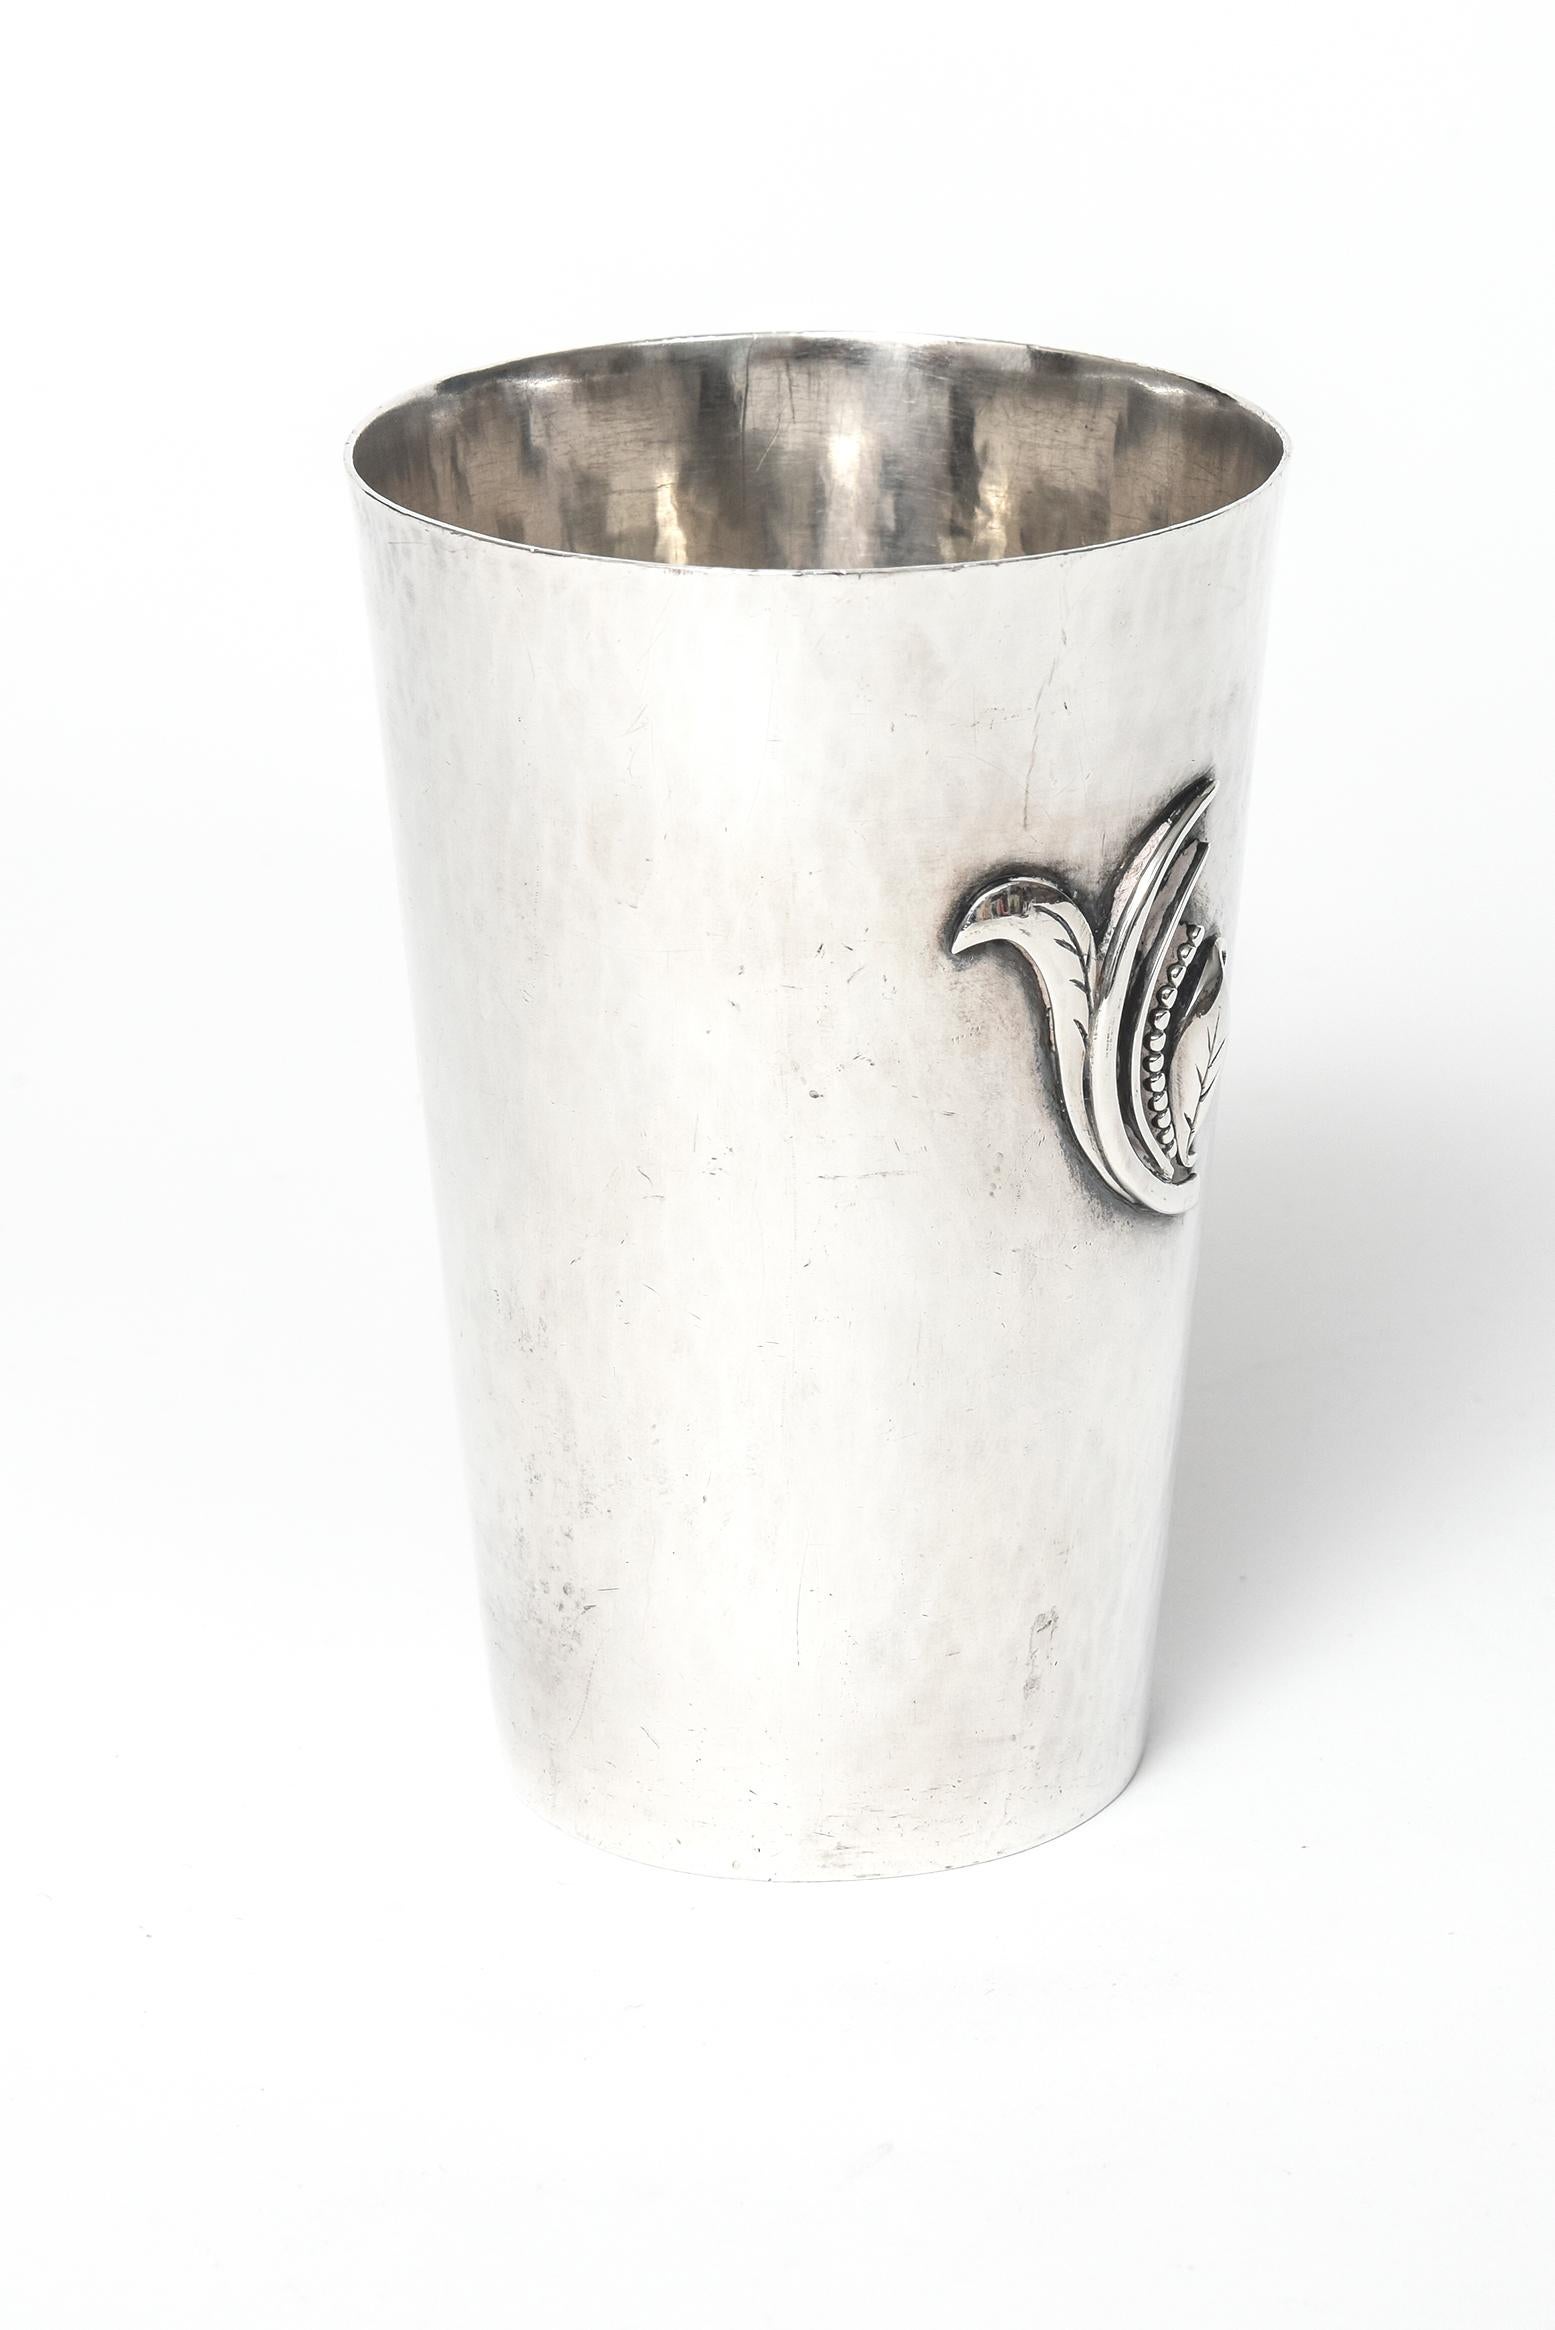 Modernist sterling silver mint julep cup designed at the Boston Atelier Janiyé by Miyé Matsukata. 
This hammered finished mint julep cup has a sterling silver applied leaf design on the front. It is signed on the bottom Janiyé Handwrought